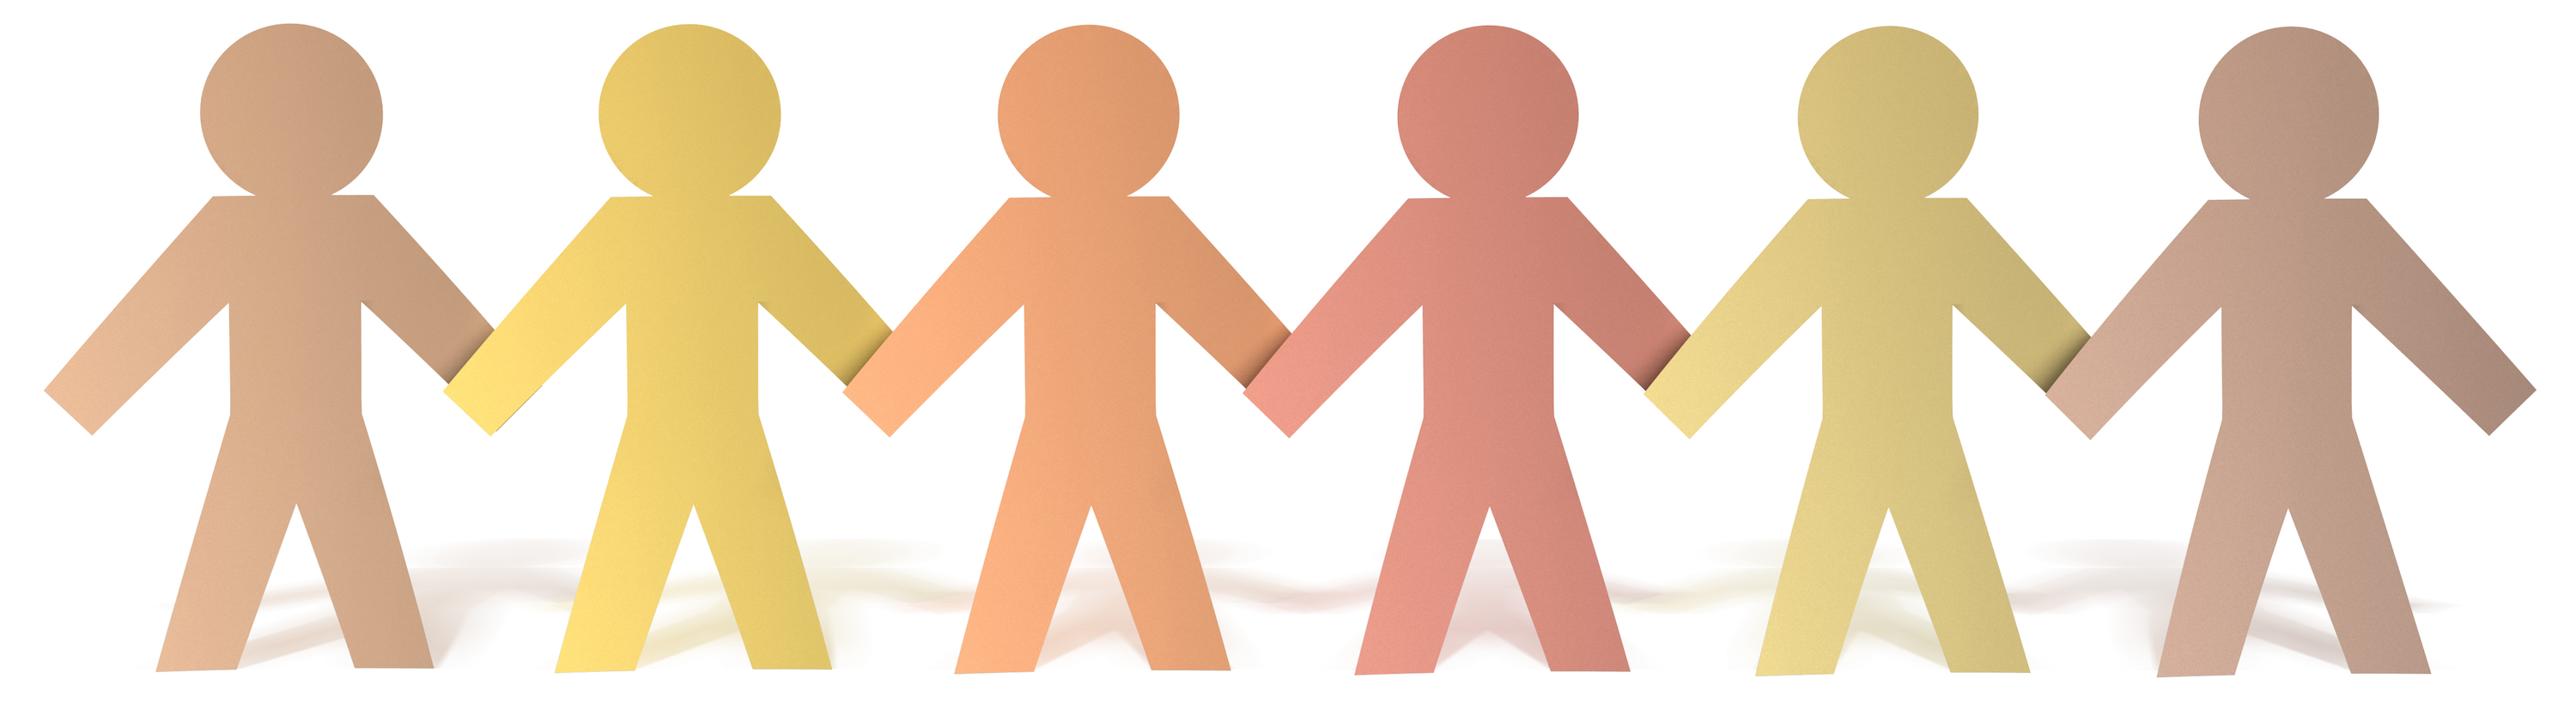 People Holding Hands #2183672   Png Holding Hands - Holding Hands, Transparent background PNG HD thumbnail